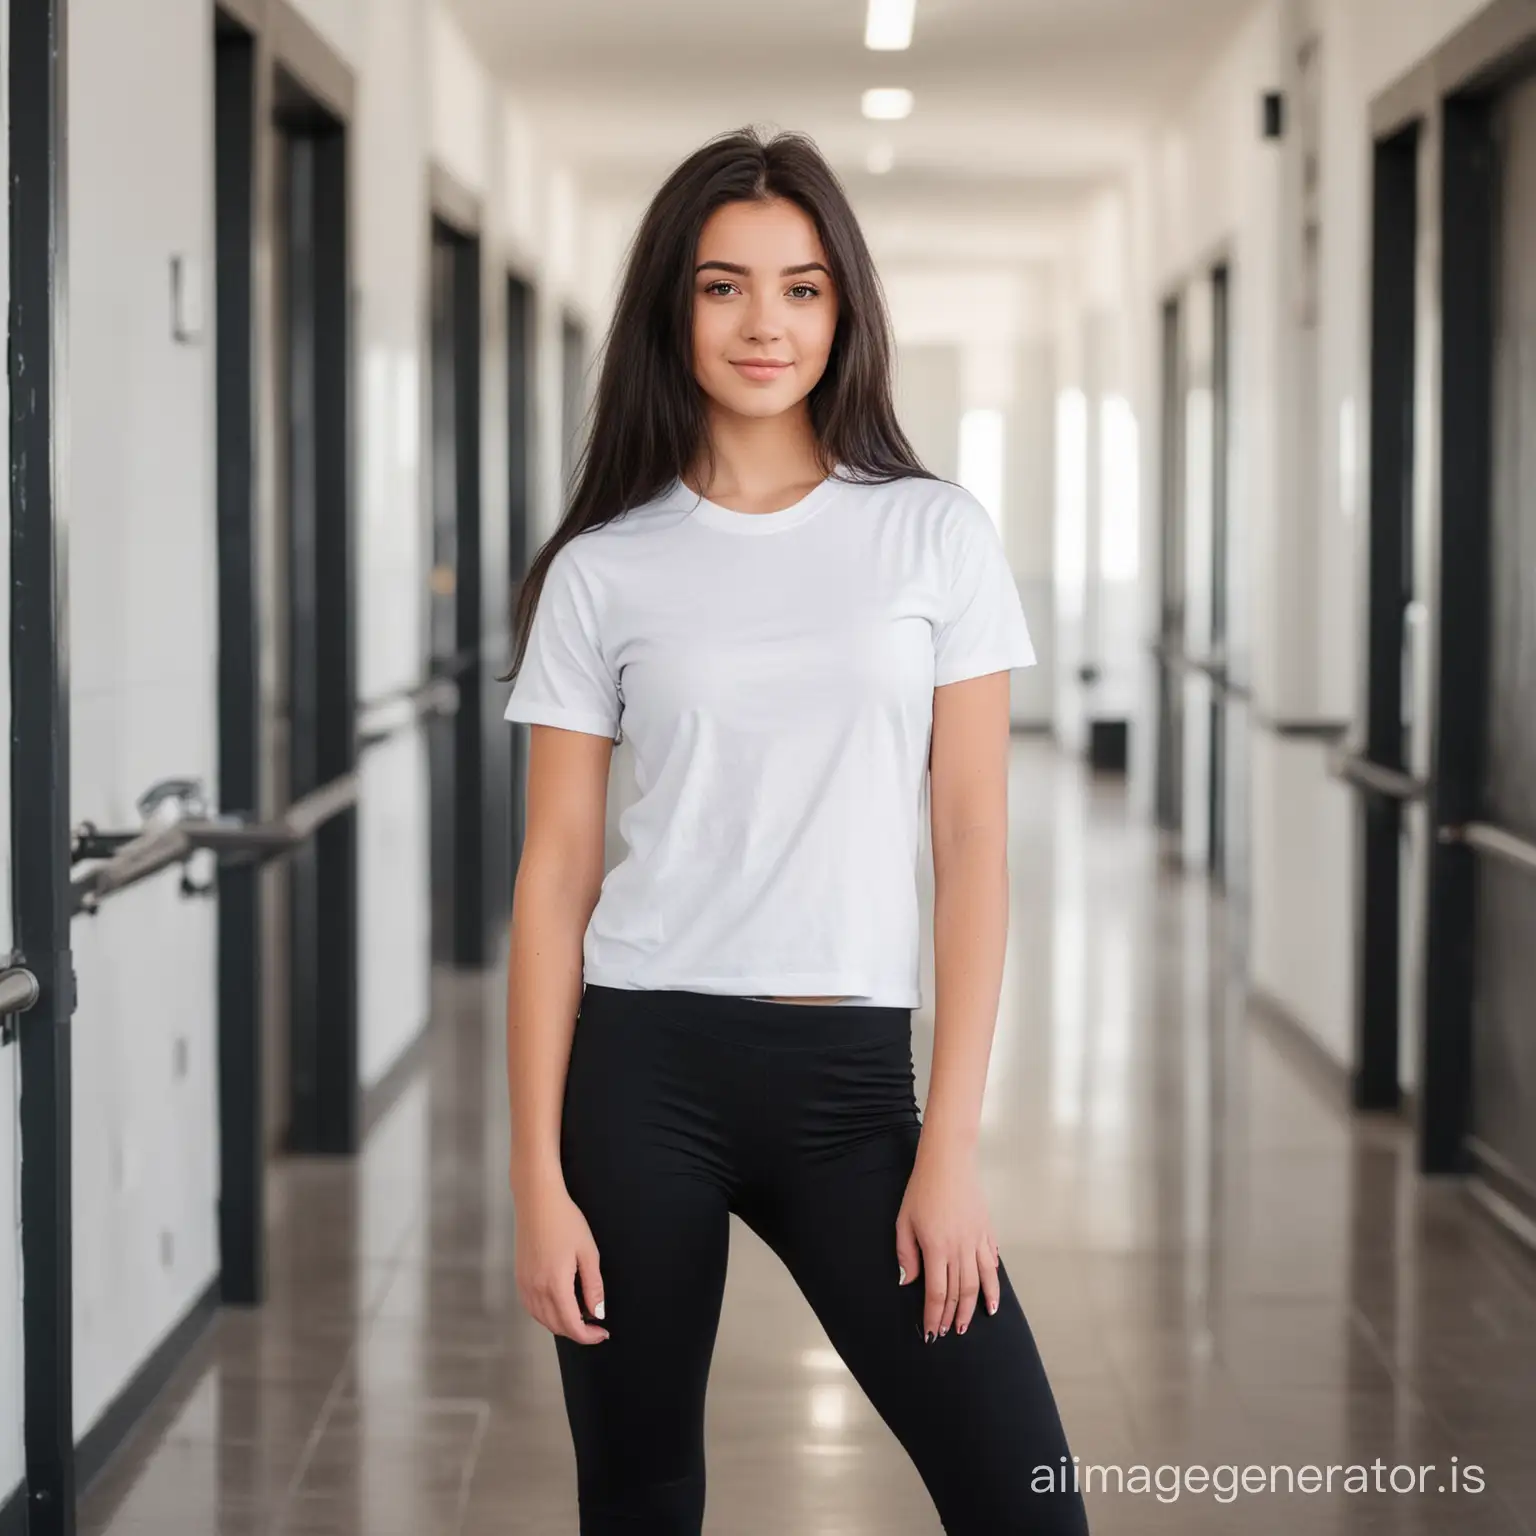 Cute raven haired sixteen years old girl standing in gym hallway in white t-shirt and black leggings